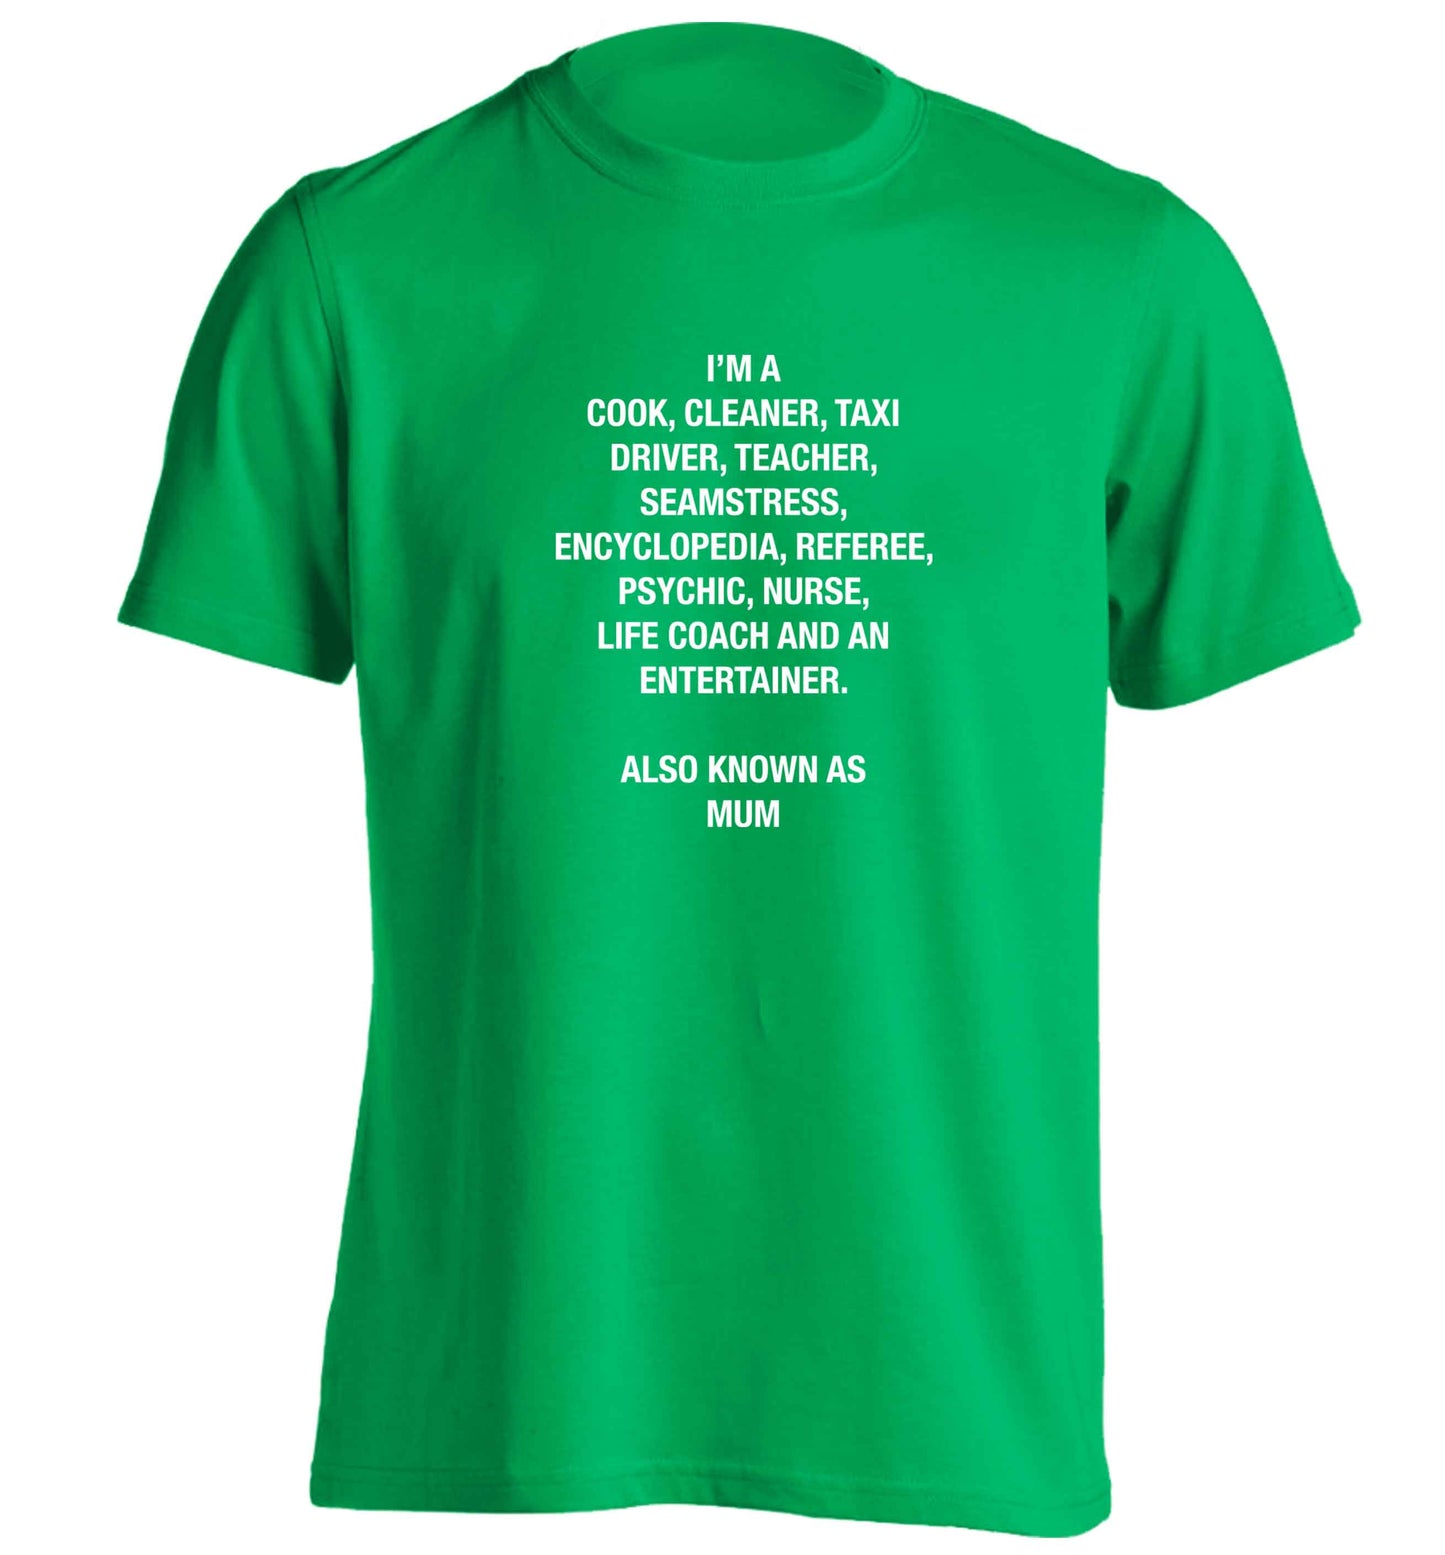 Funny gifts for your mum on mother's dayor her birthday! Mum, cook, cleaner, taxi driver, teacher, seamstress, encyclopedia, referee, psychic, nurse, life coach and entertainer adults unisex green Tshirt 2XL